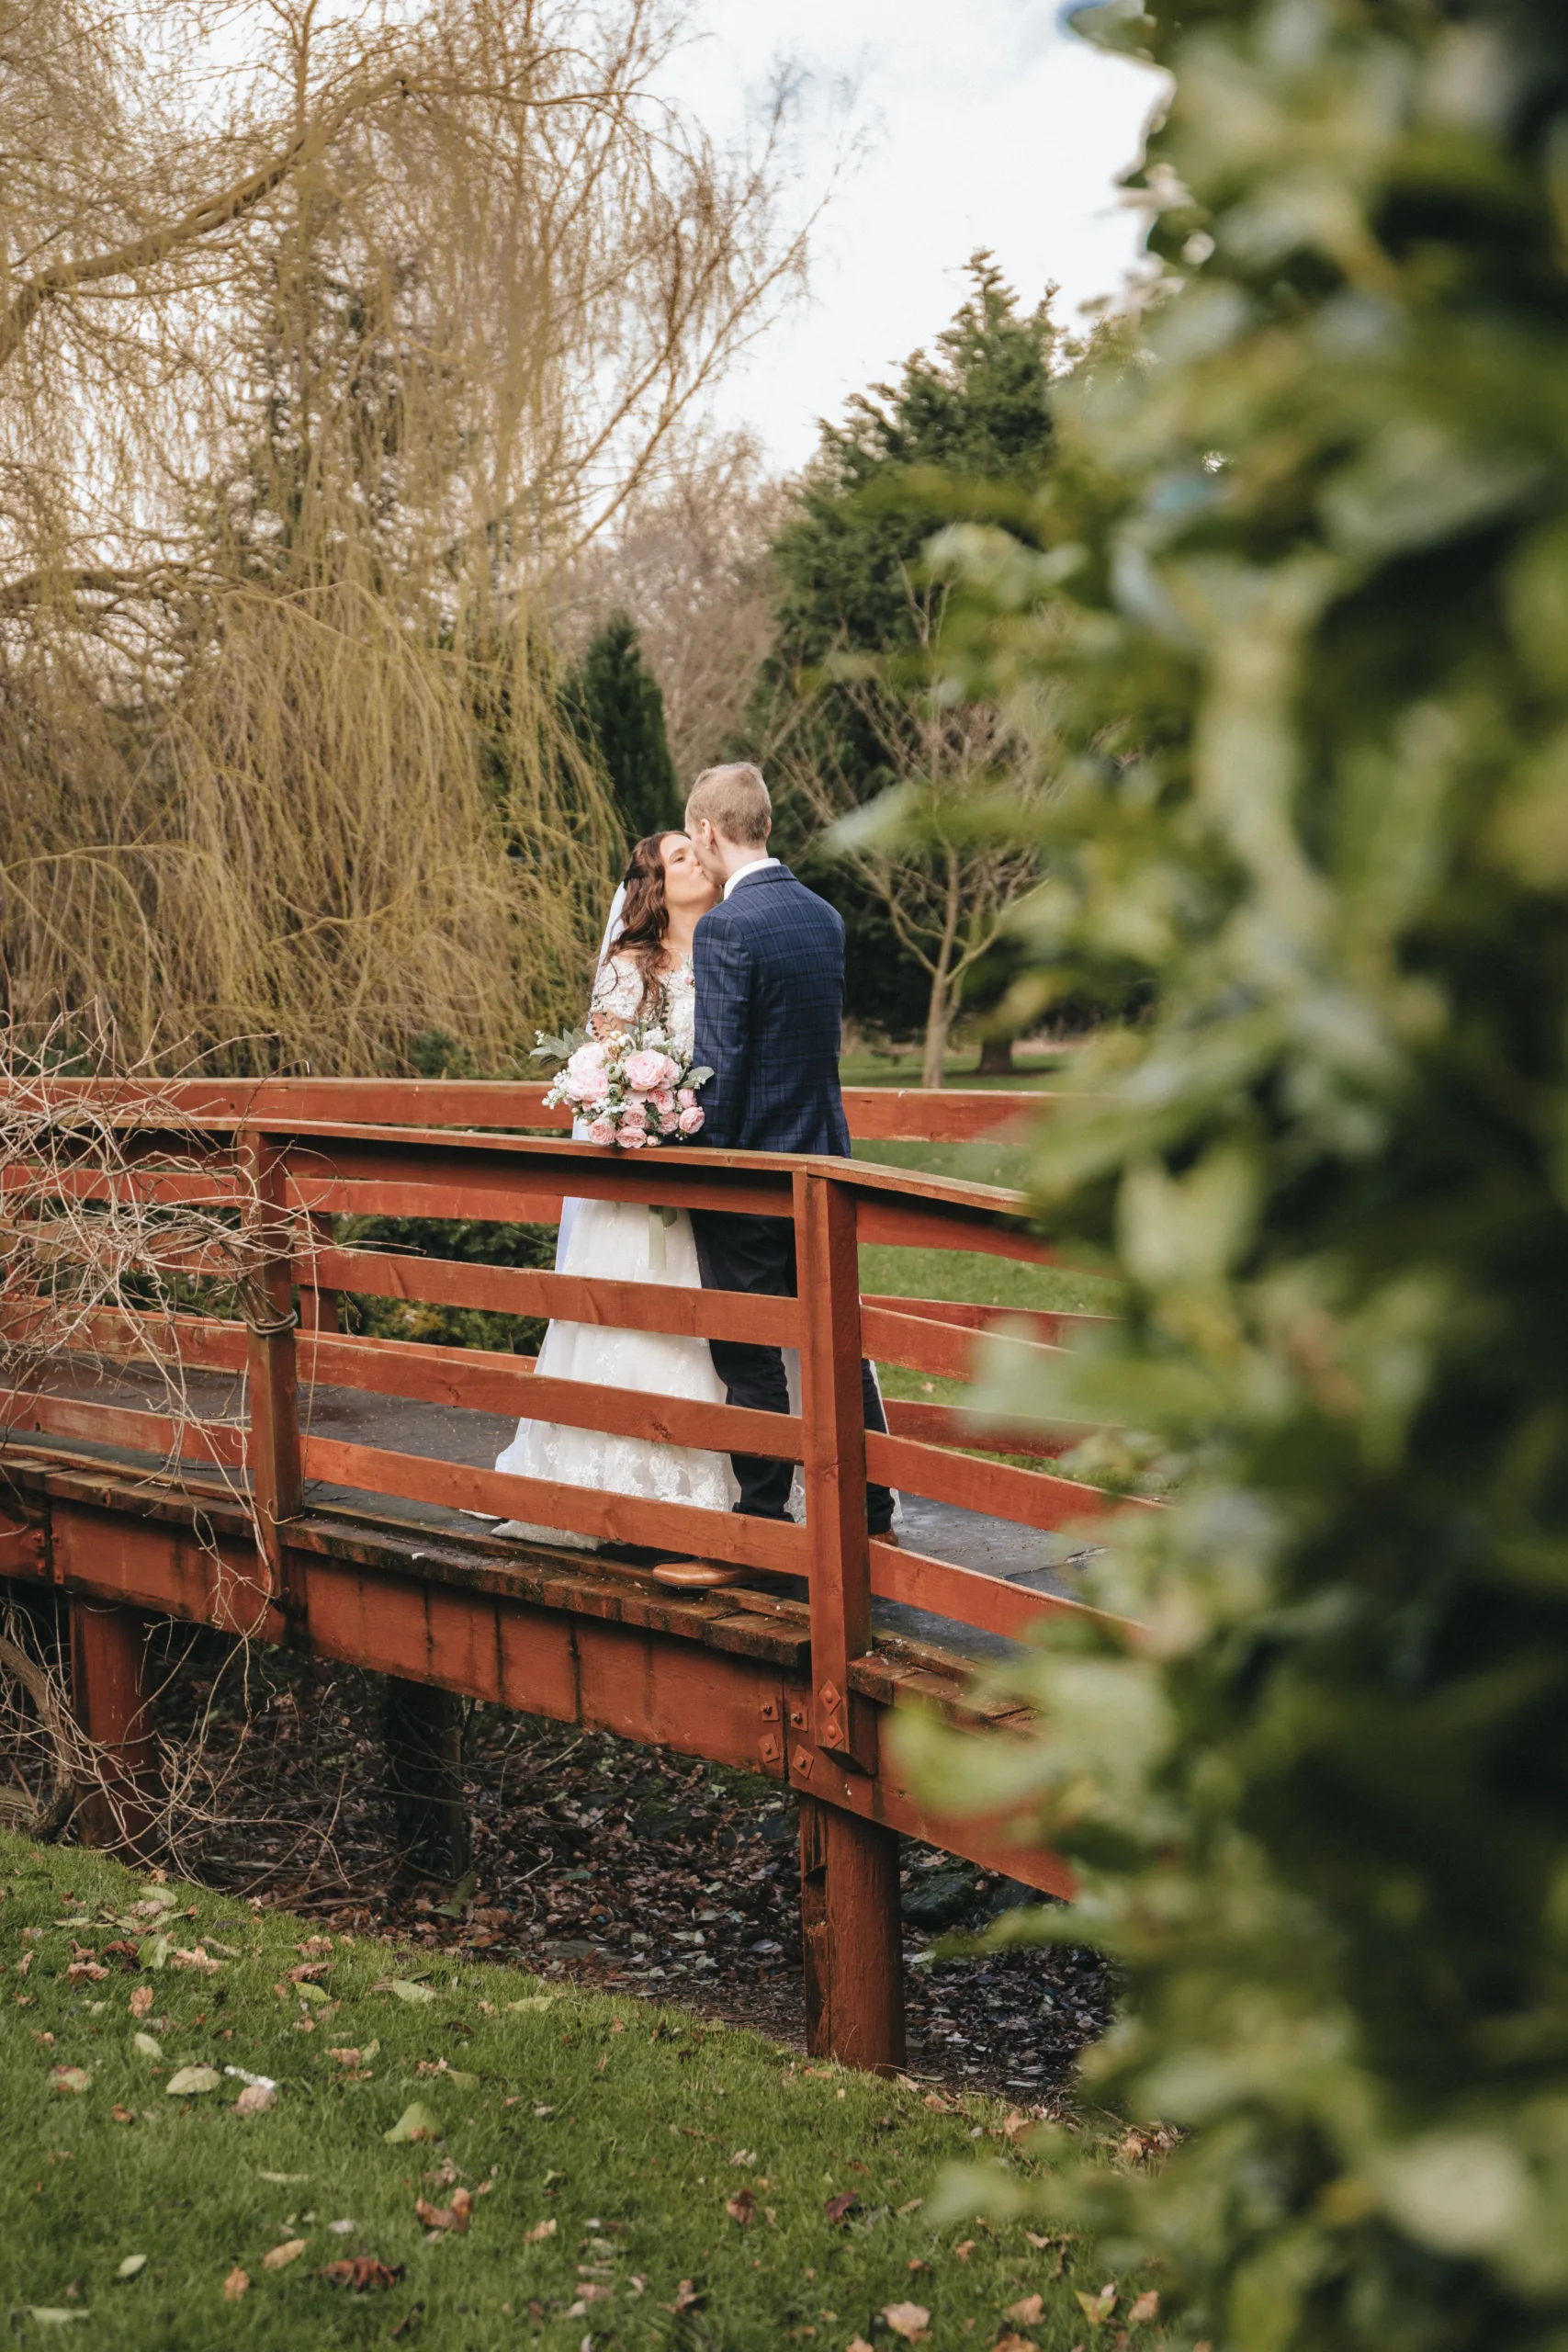 A bride and groom standing on a bridge in a garden.